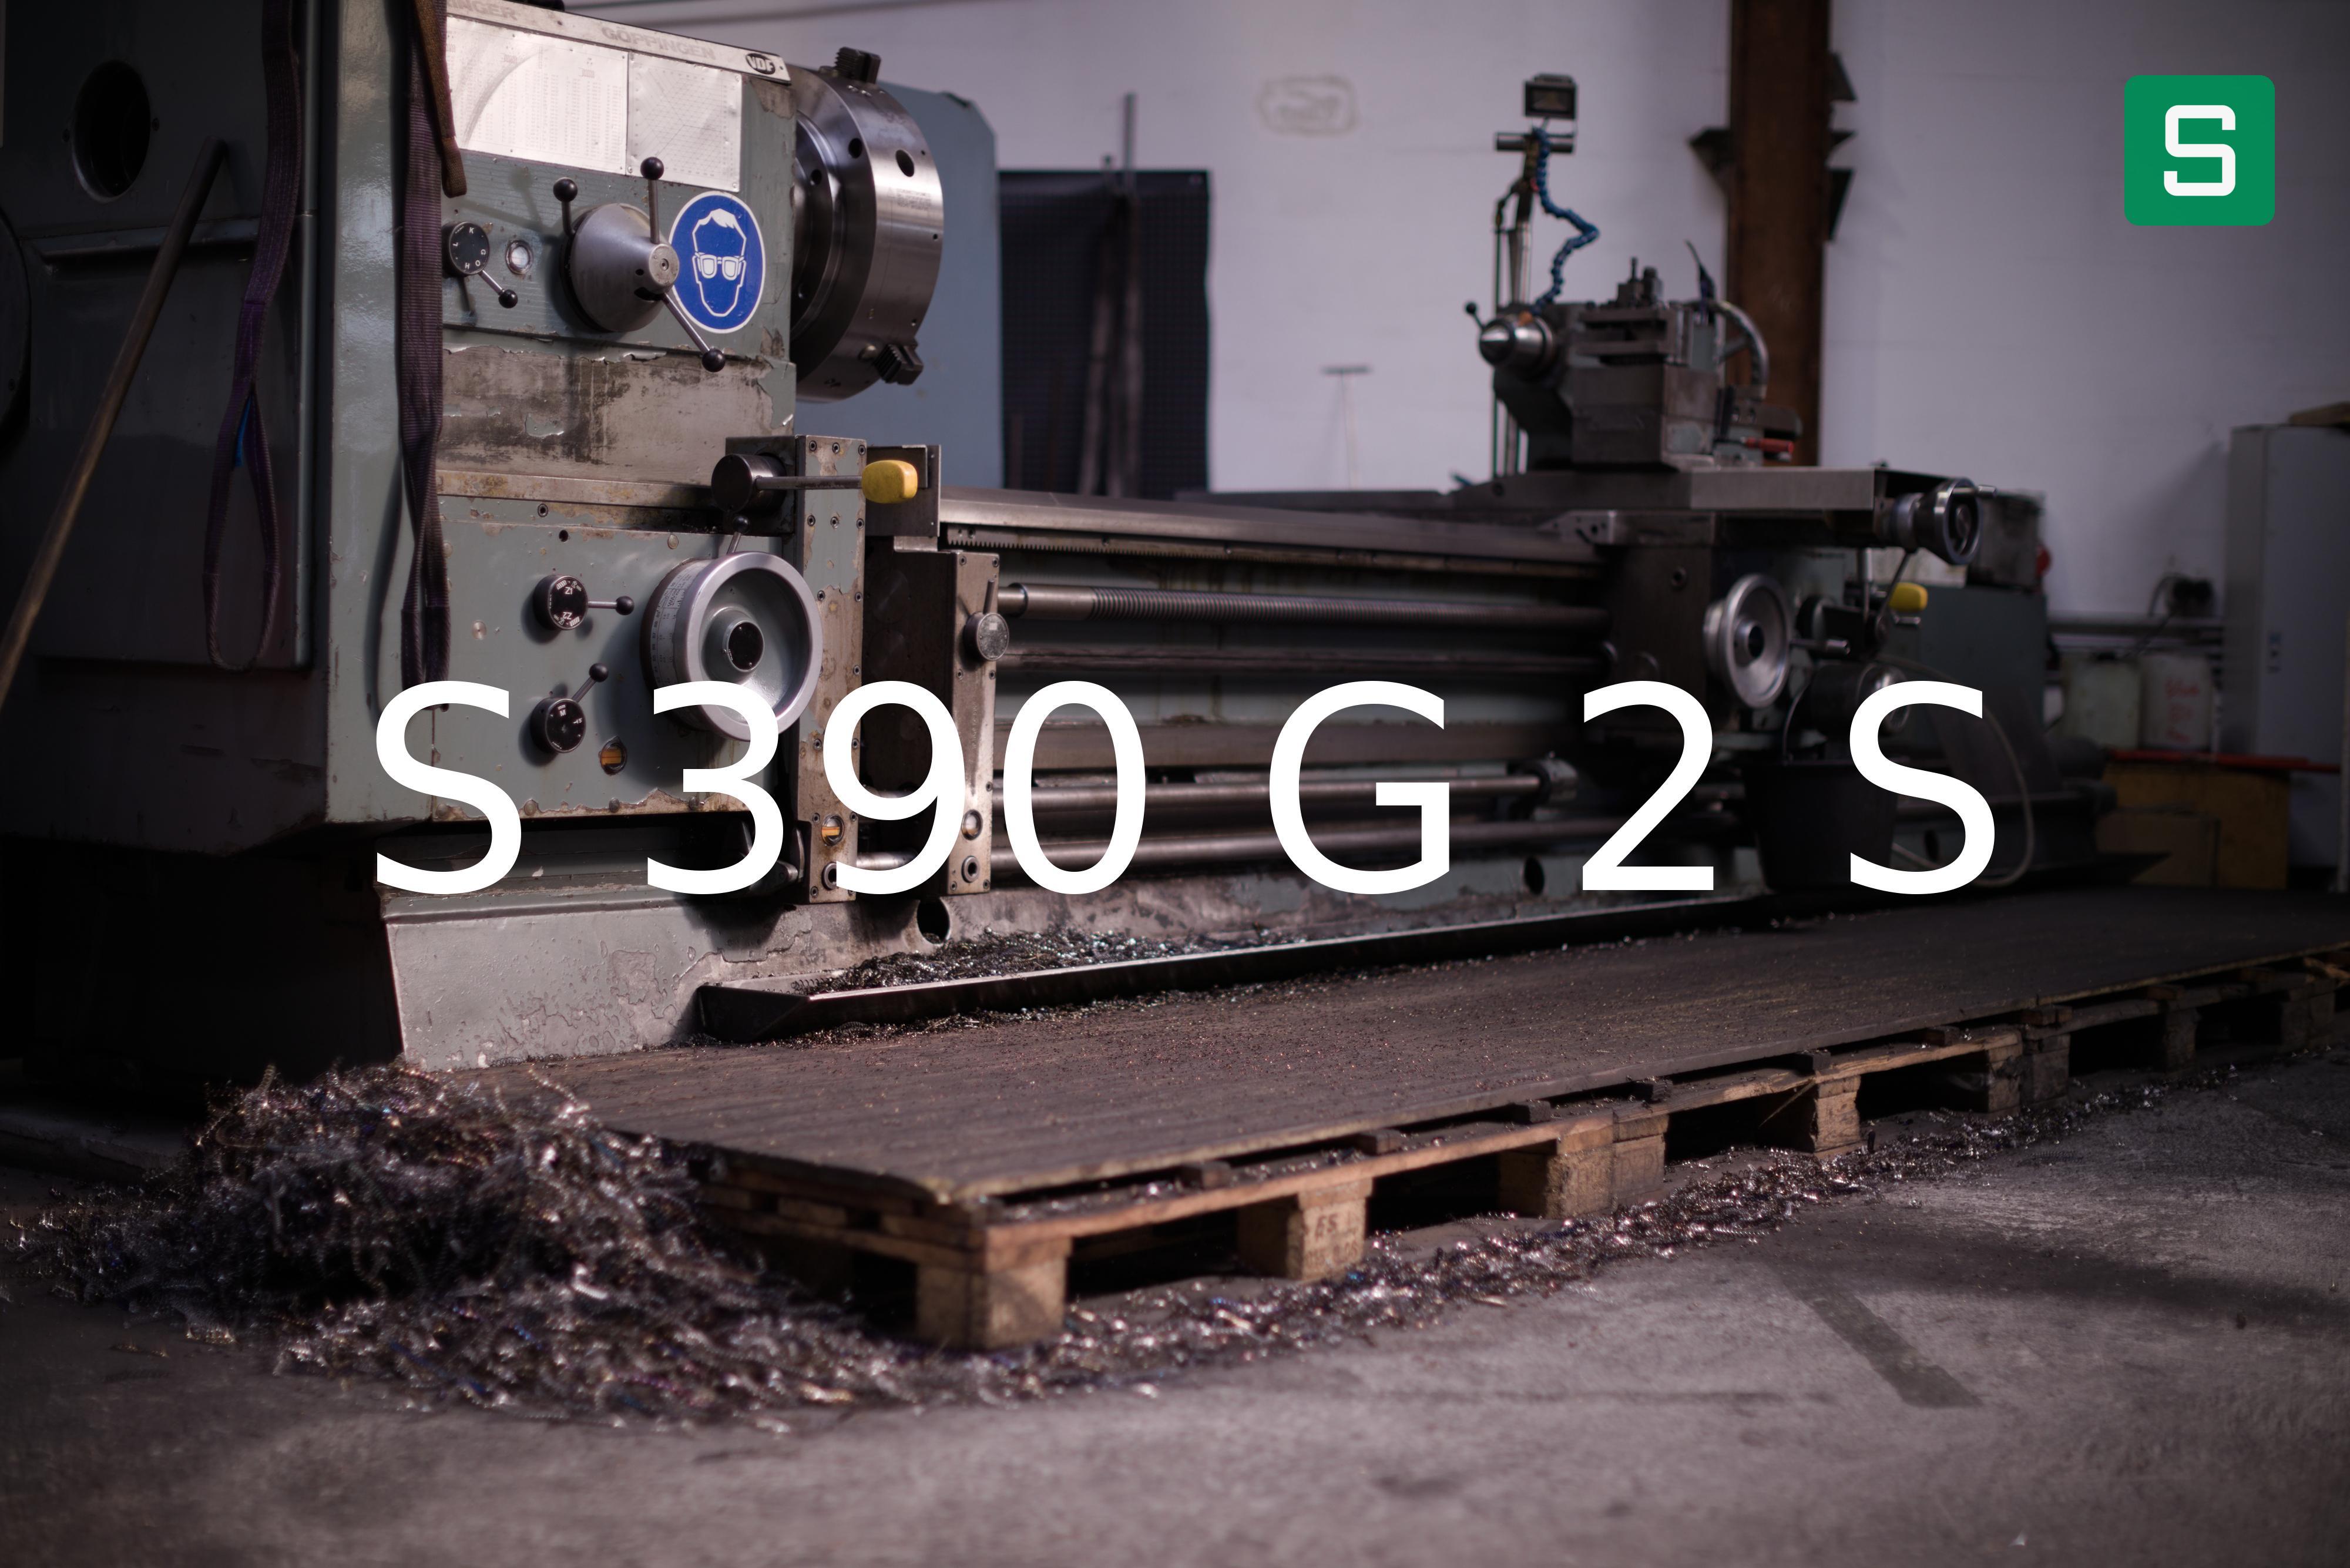 Steel Material: S 390 G 2 S